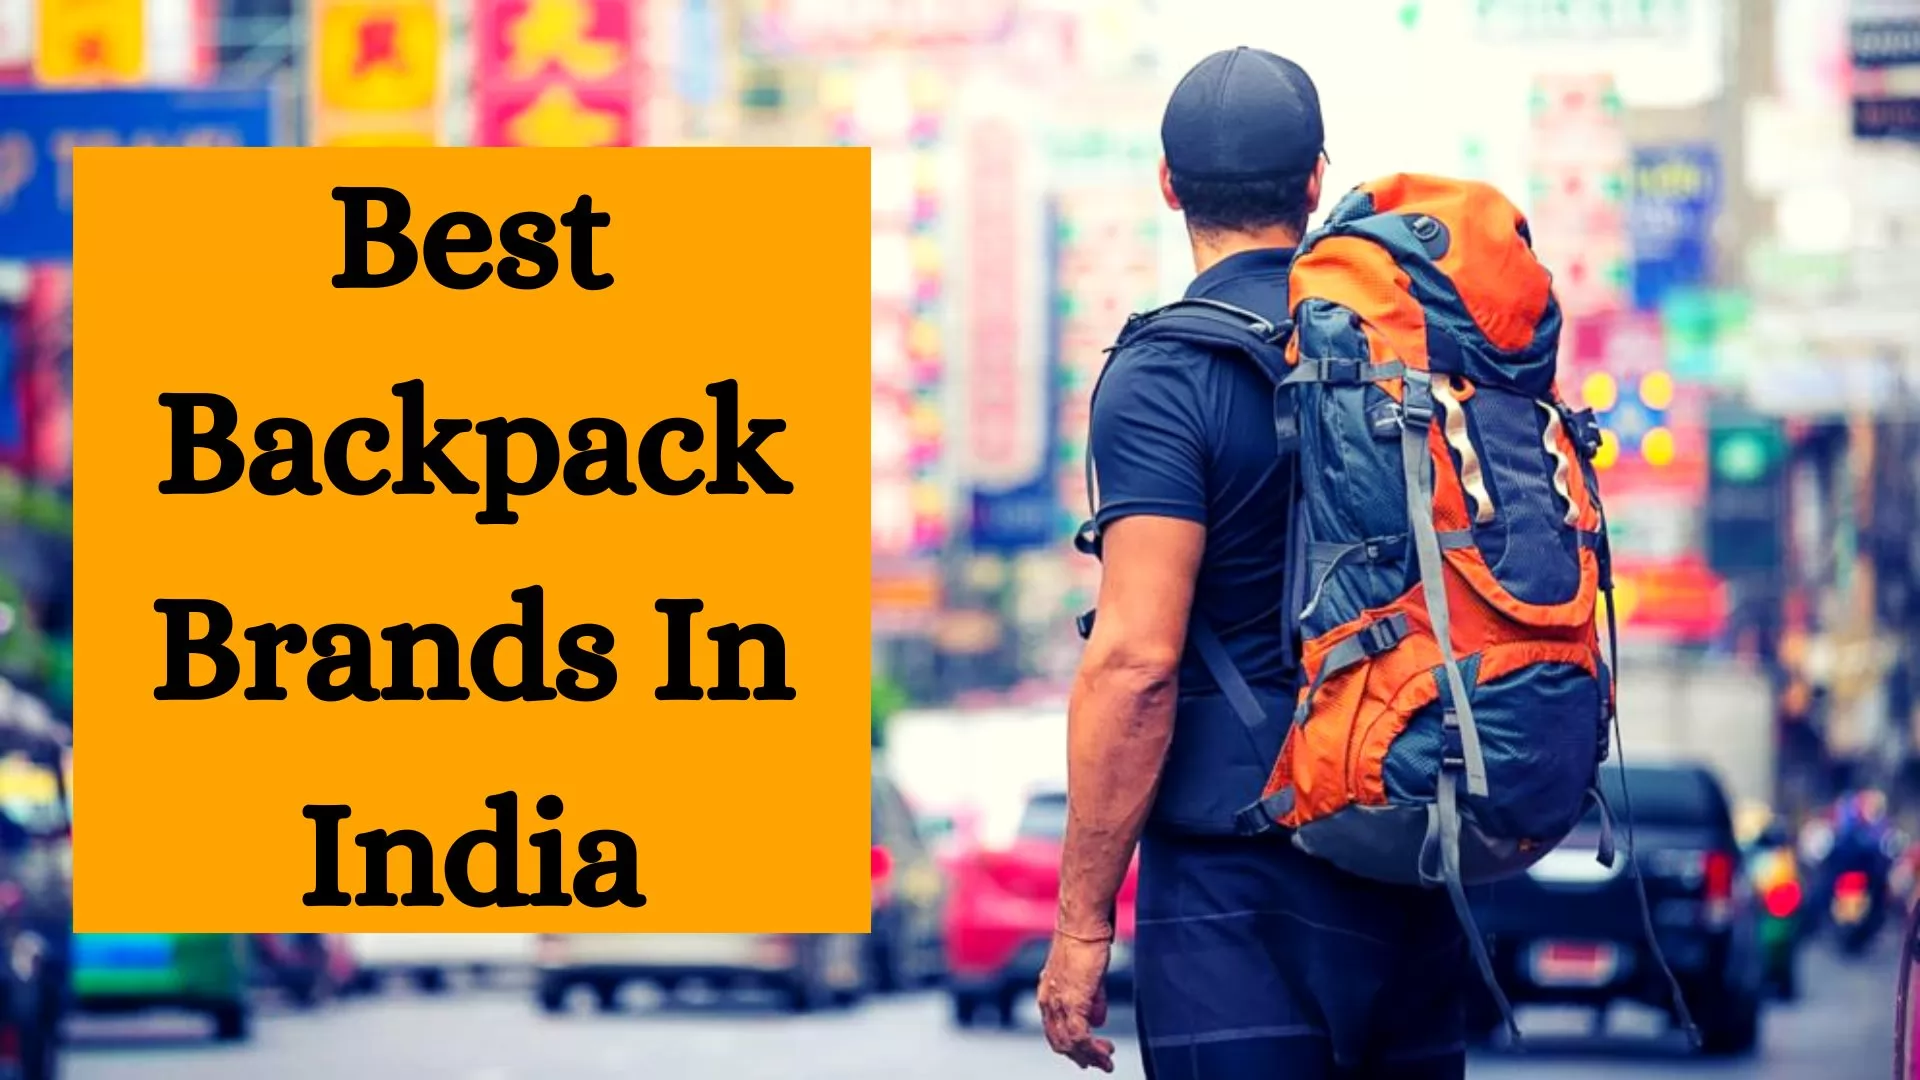 Best Backpack Brands in India 